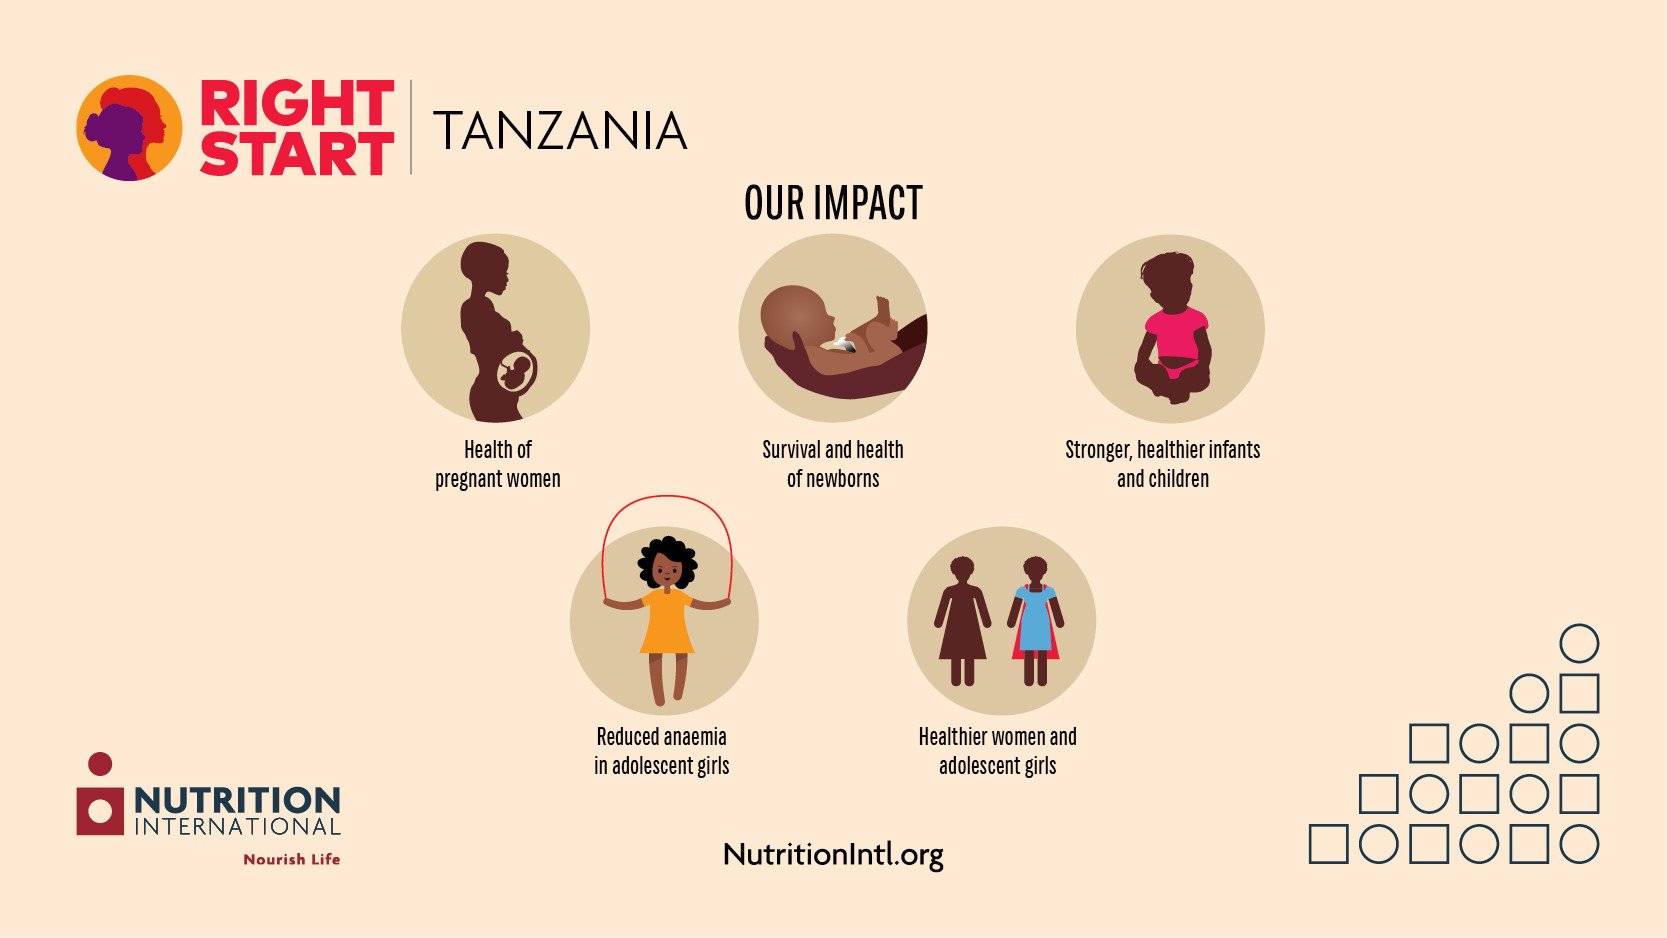 Nutrition International invests in a 5-year project to boost nutrition in Tanzania